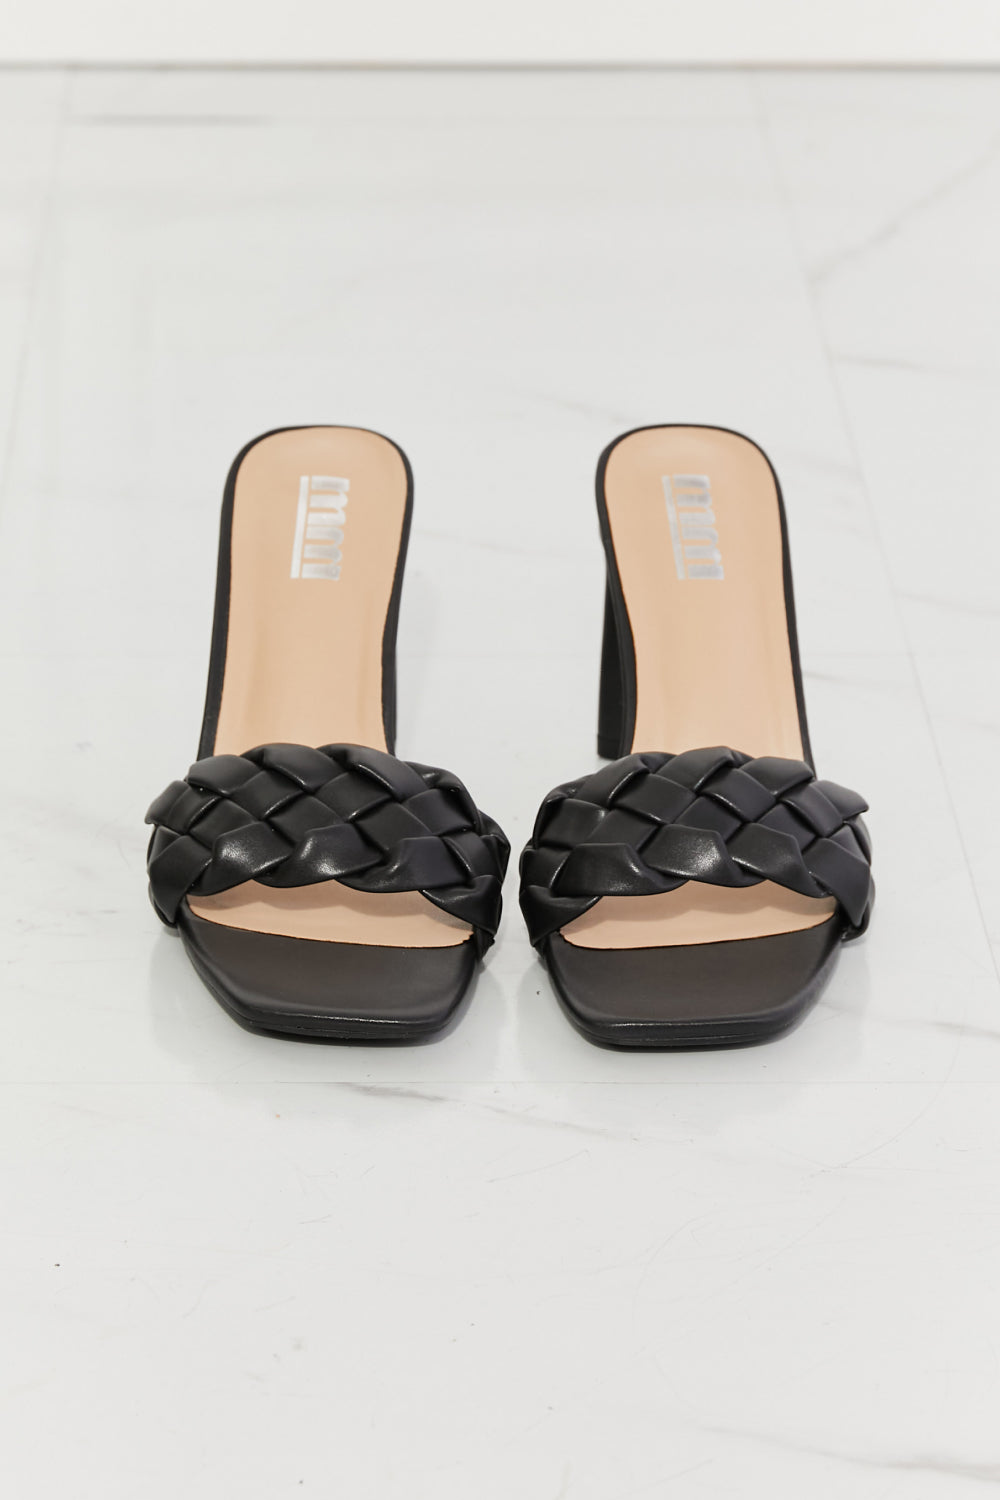 MMShoes Top of the World Braided Block Heel Sandals in Black Posh Styles Apparel